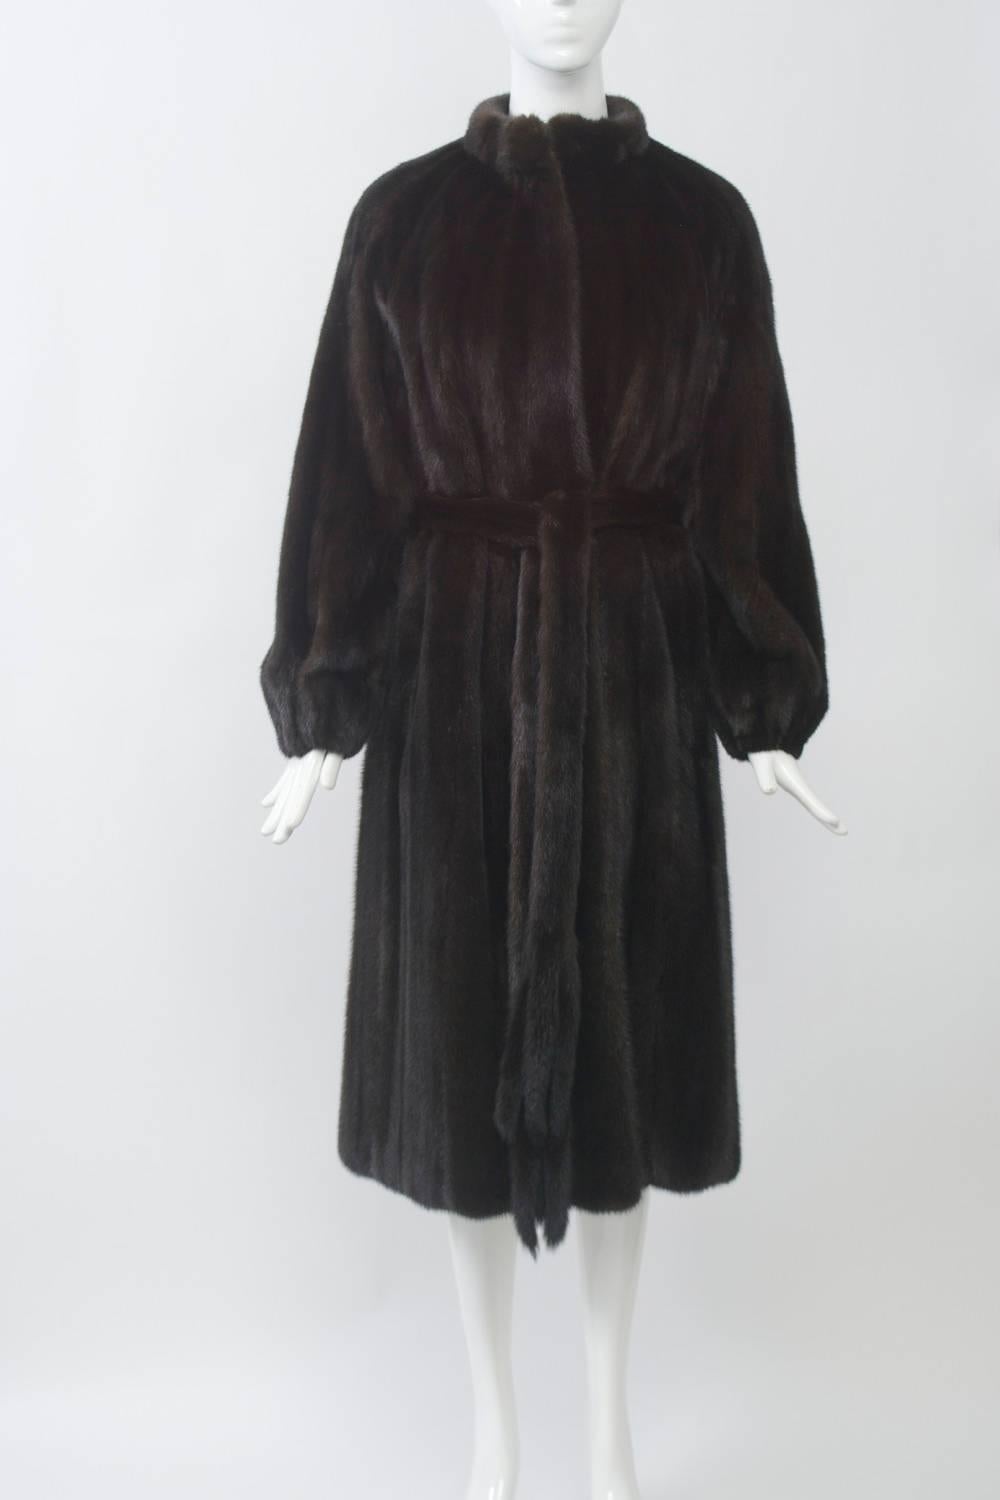 A classic, timeless mink coat of mahogany color and simple styling that features a slim body with modified A-line skirt and a funnel collar. Slit pockets. The coat is held close to the body with a long self mink tie terminating in tails. No